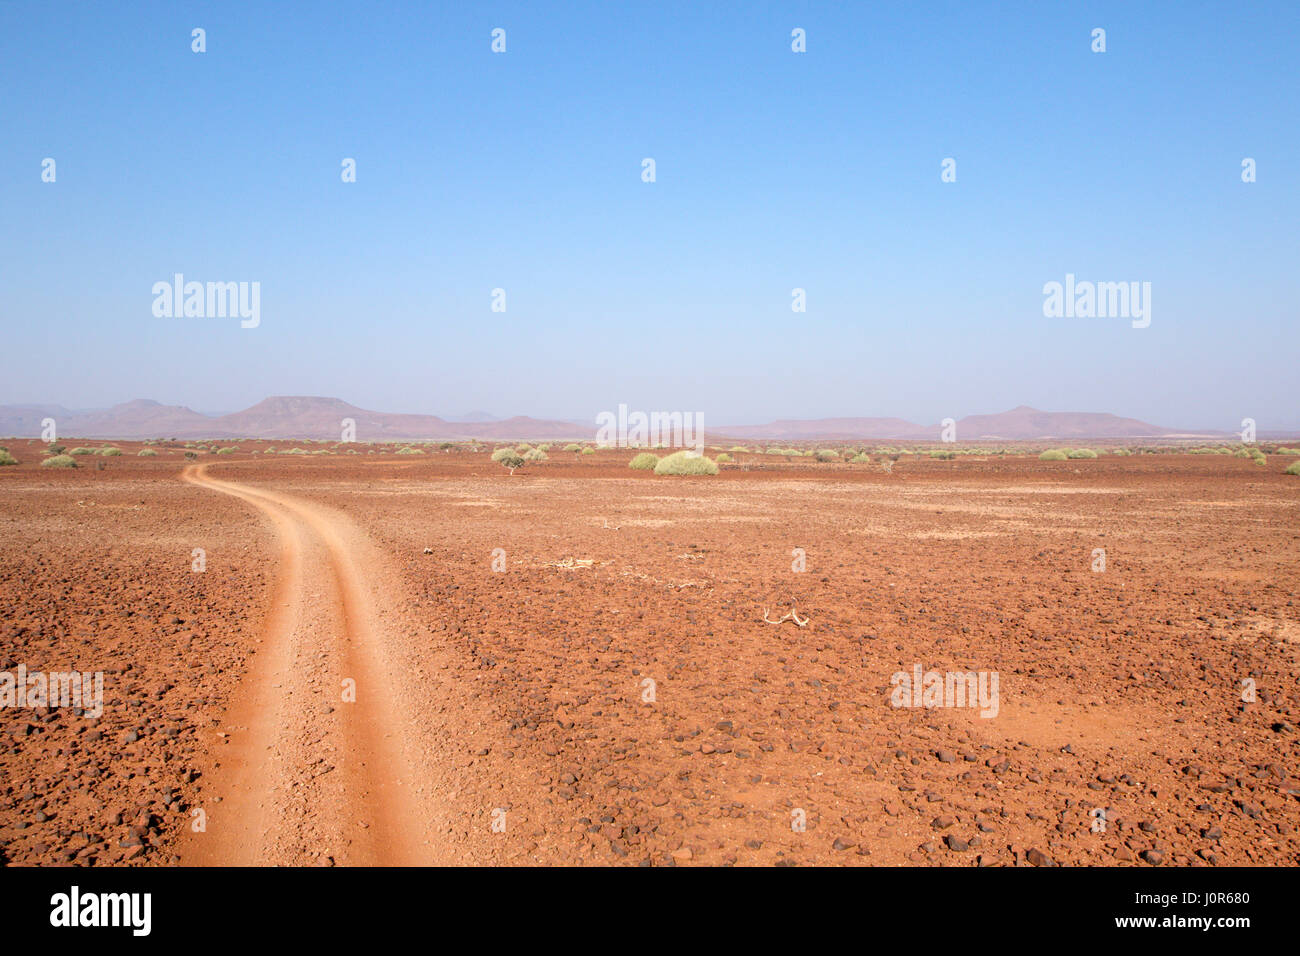 Landscape in the Palmwag concession, Namibia. Stock Photo